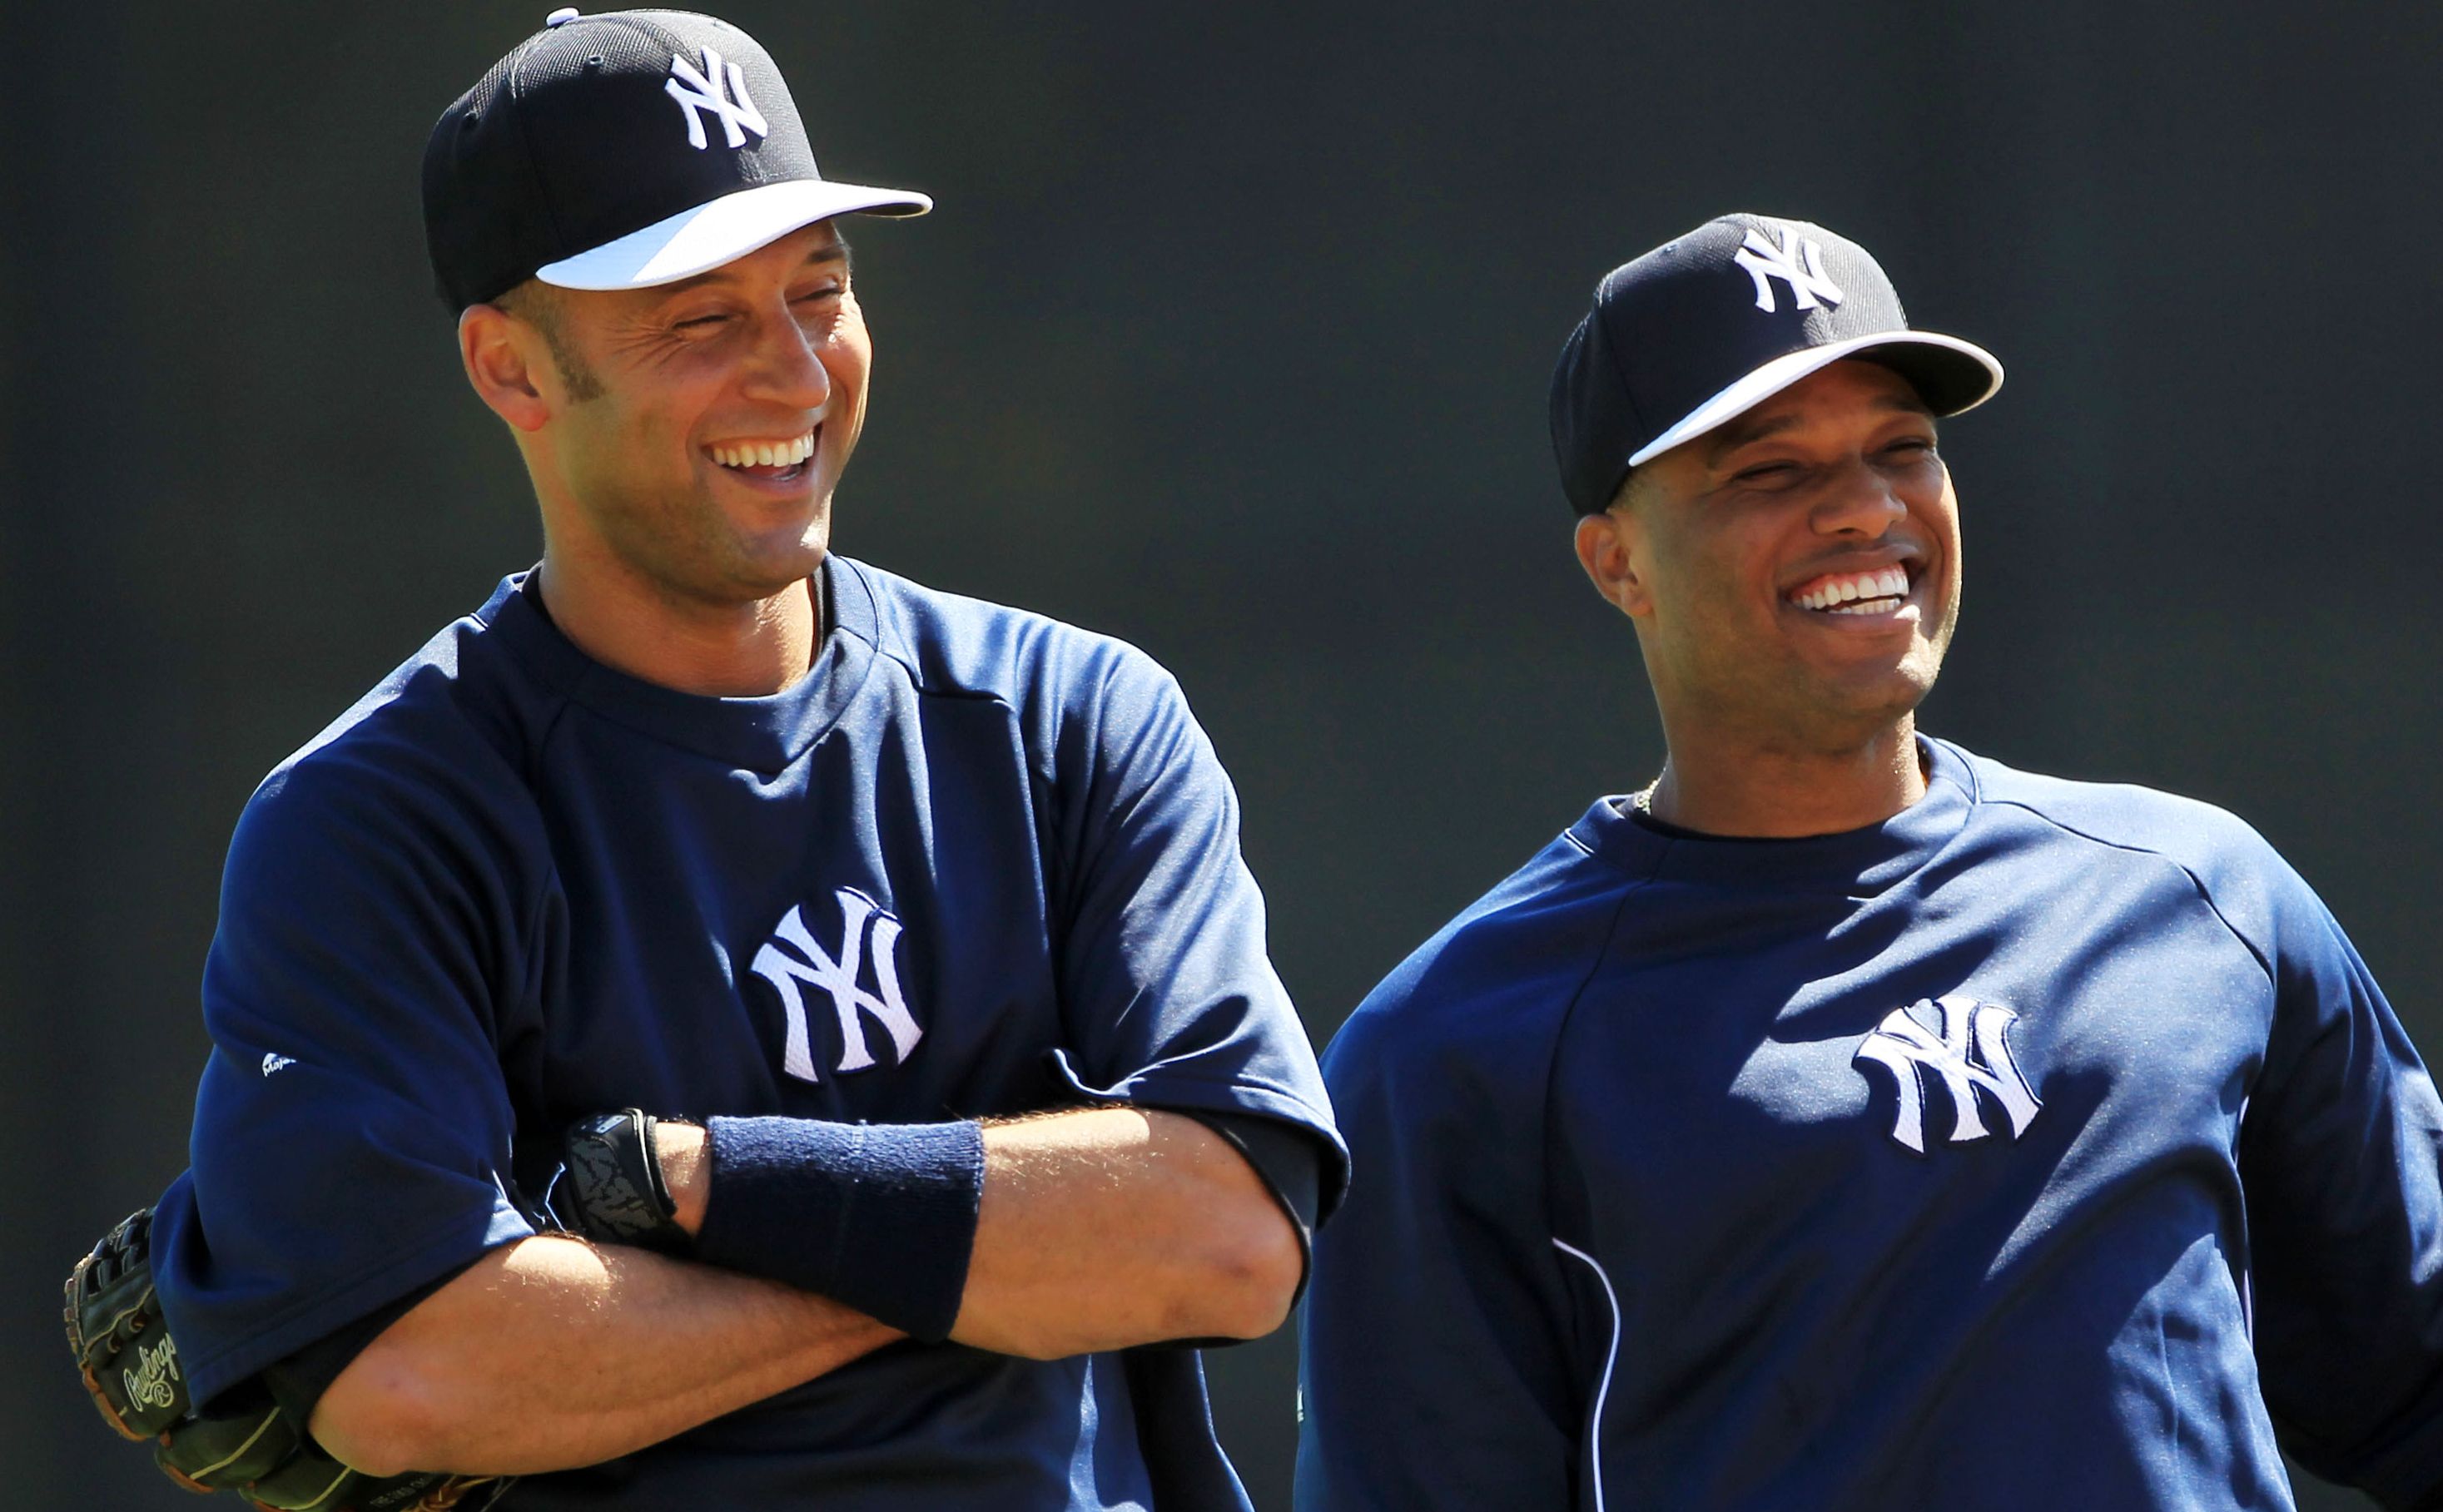 Derek Jeter calls out the one writer who didn't vote for him